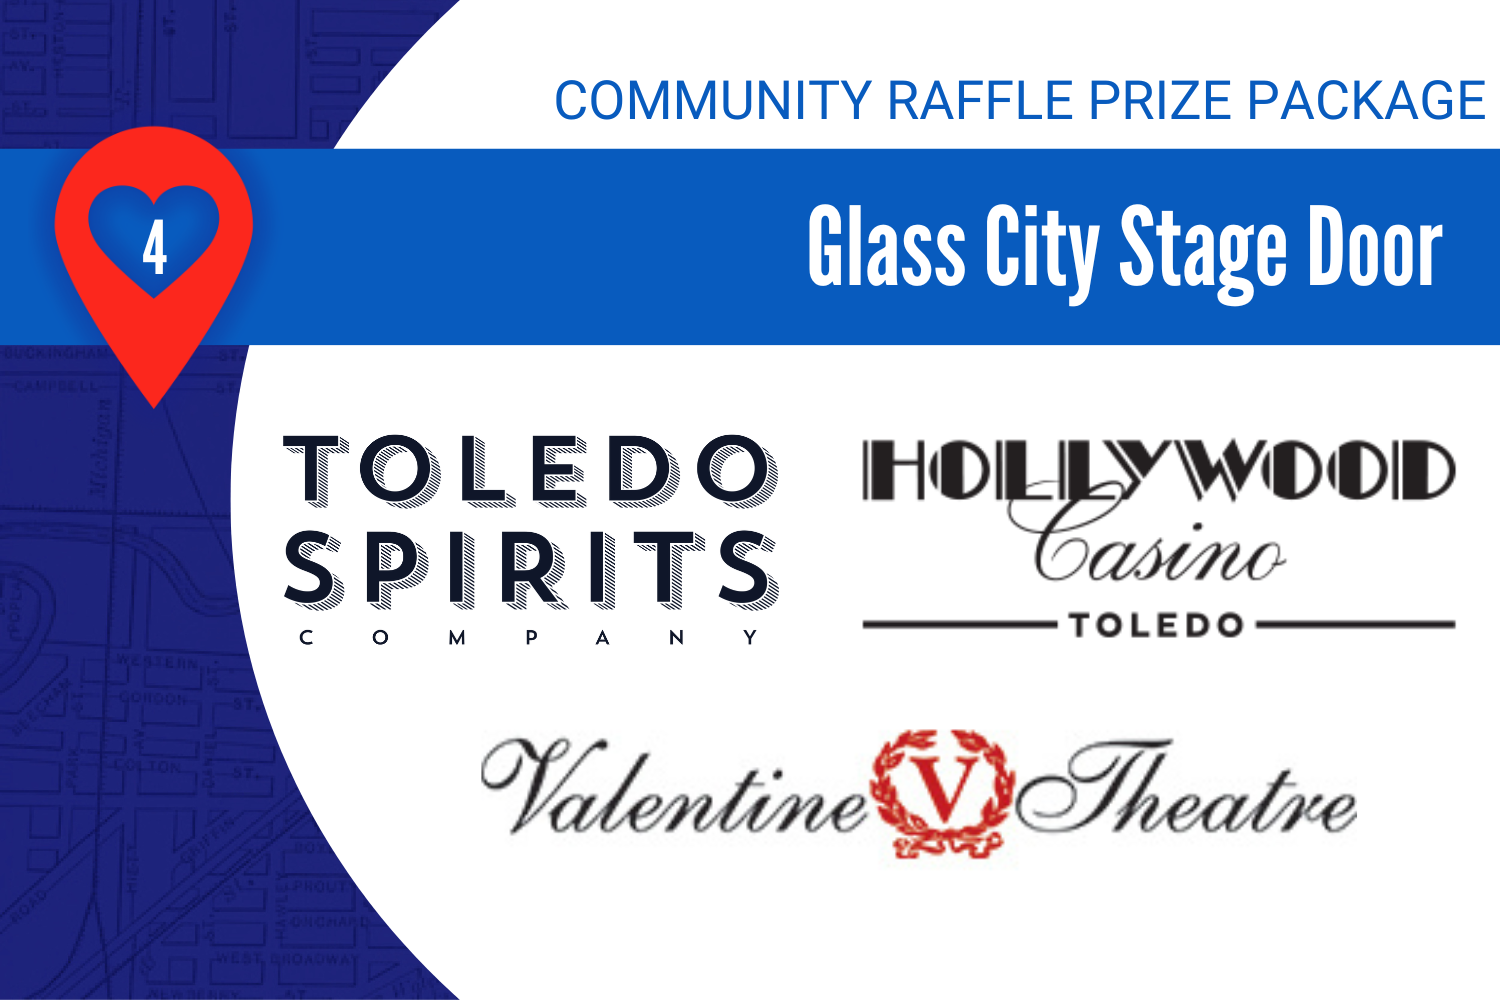 Community Raffle Package 4, Glass City Stage Door. Includes logos for Toledo Spirits, Hollywood Casino, and valentine theater.